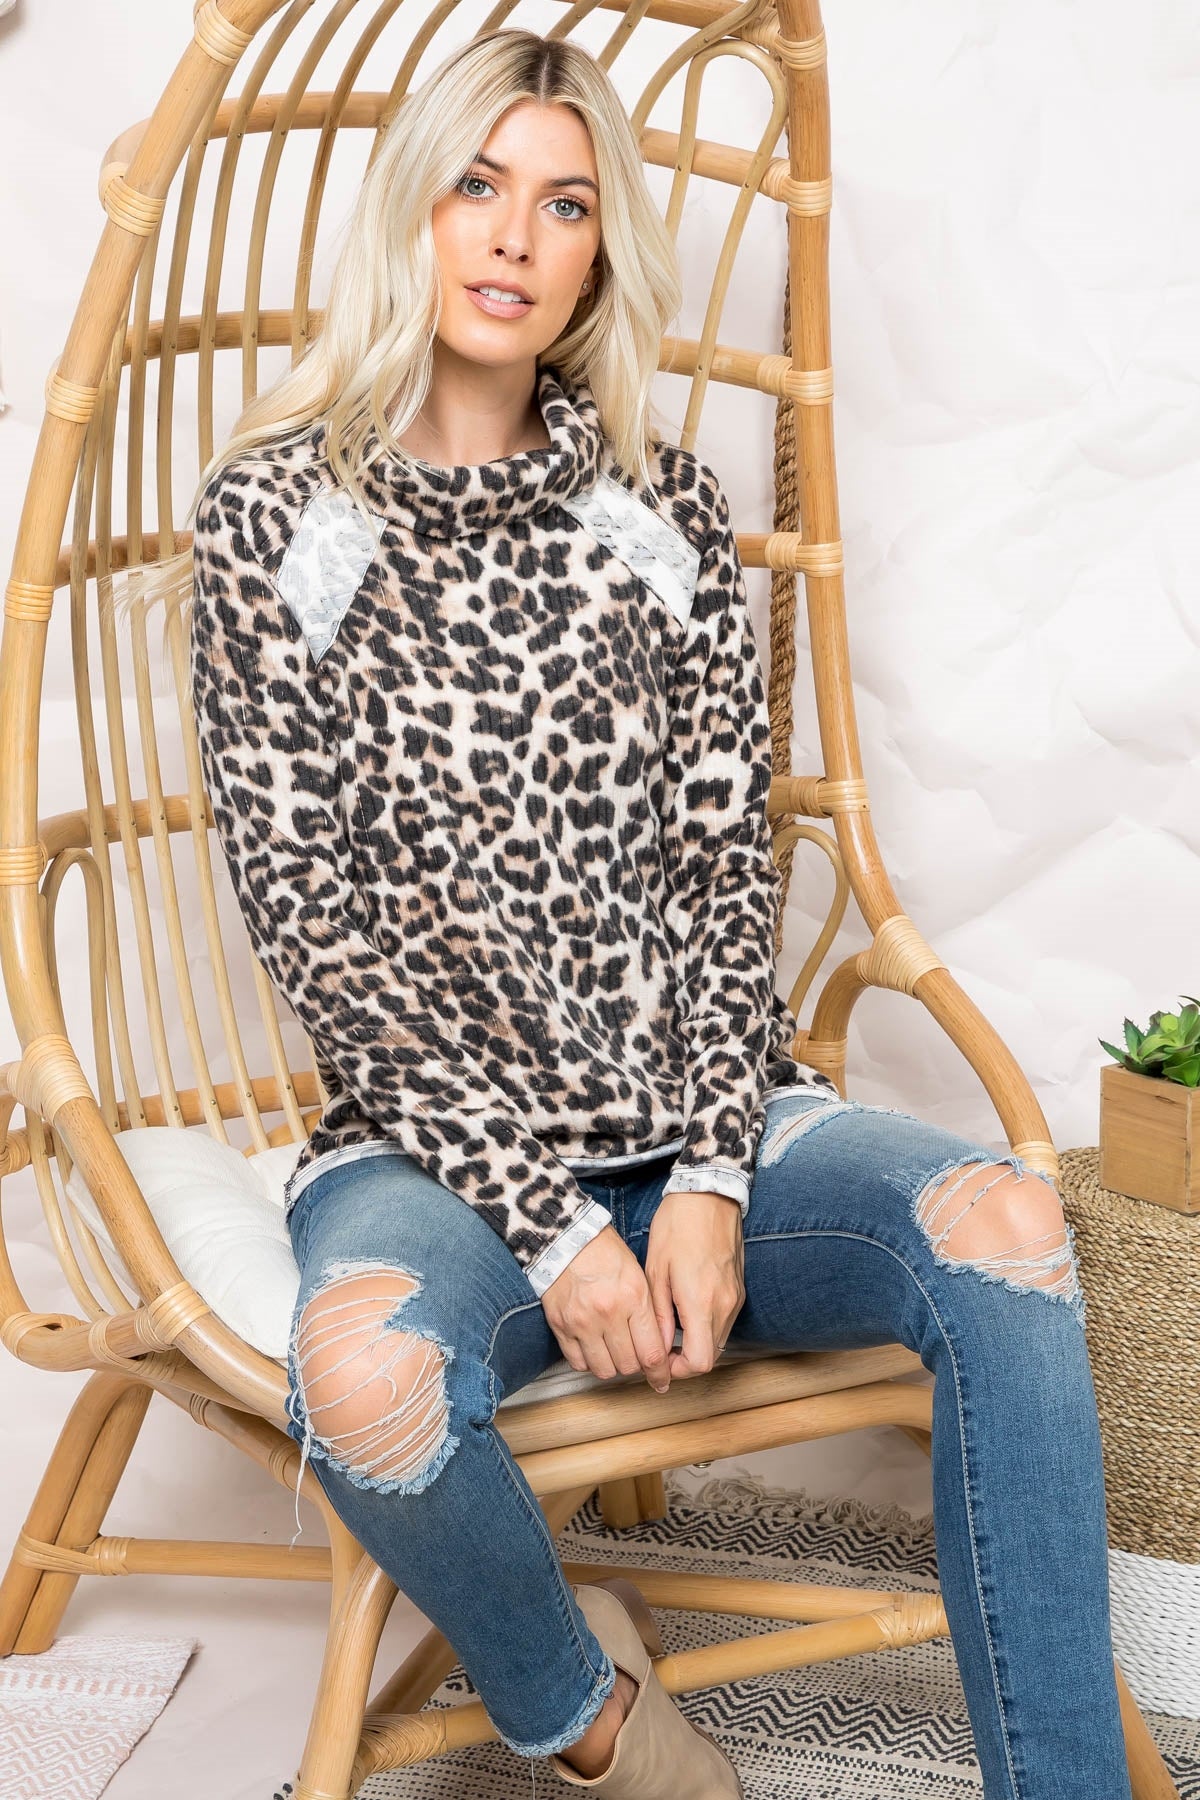 "Walk In The Park" is a thin, buttery soft, leopard print, long sleeve pullover. It features a loose turtle neck and reserve detailing. Sizes small through x-large.